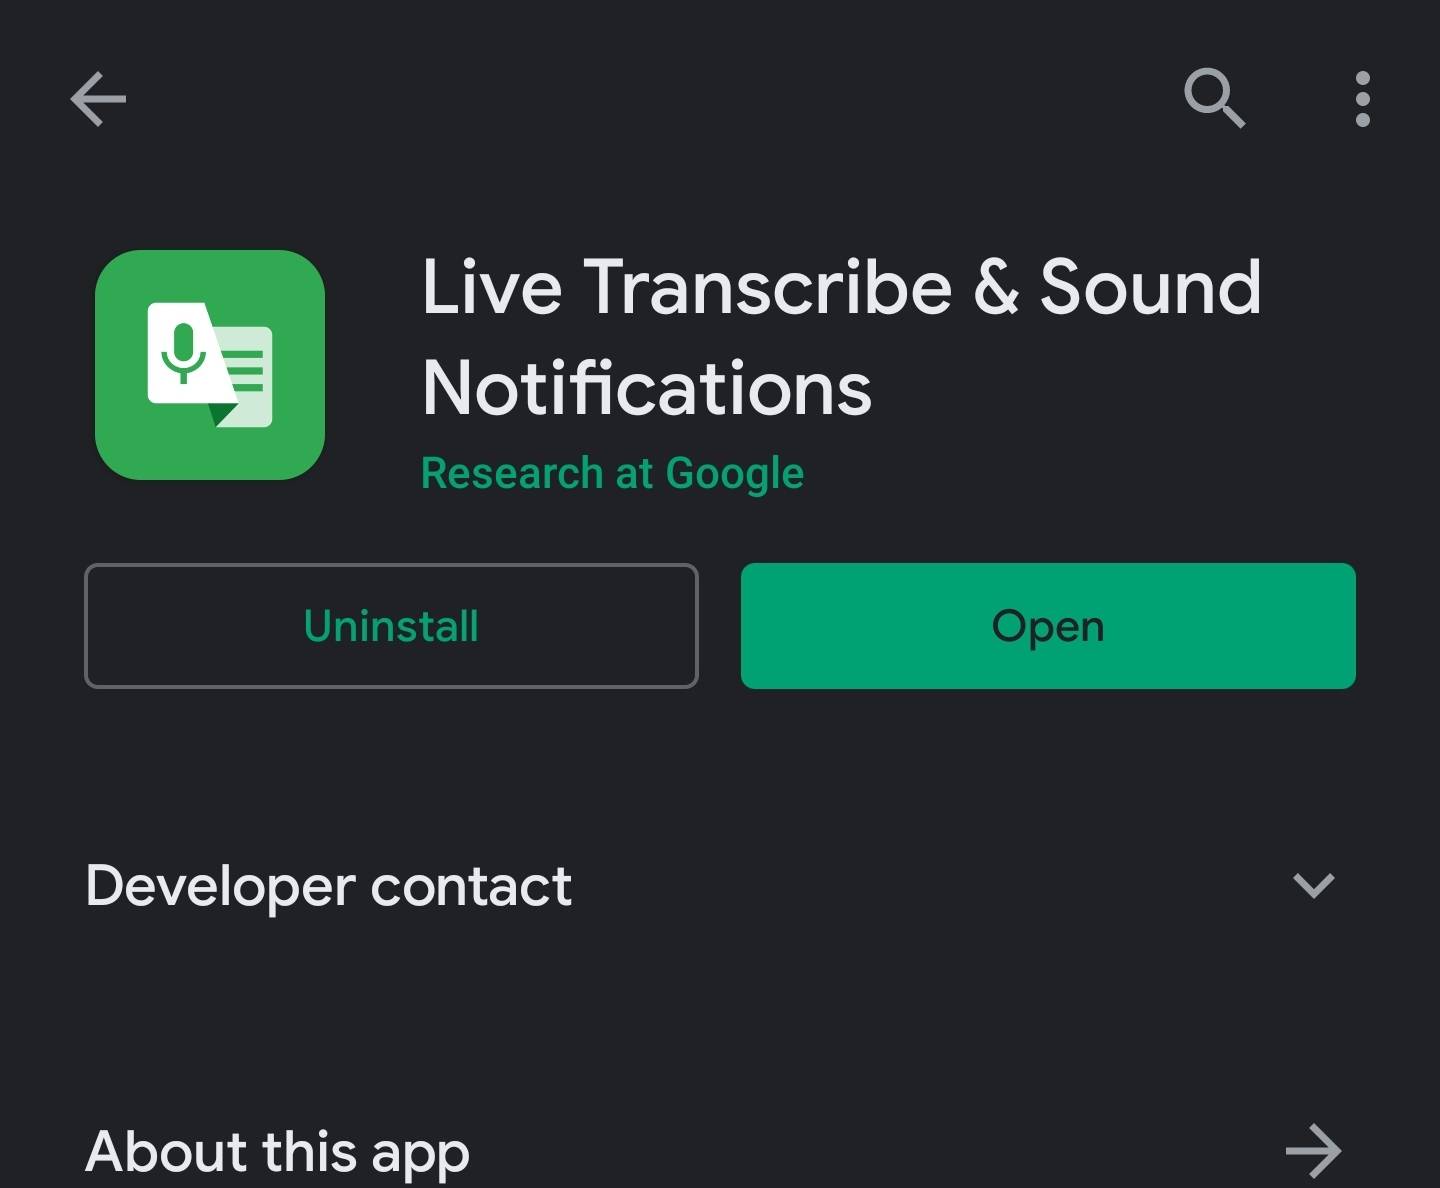  The Live Transcribe & Sound Notifications app on a mobile device, developed by Google, allows users to uninstall or open the app, view developer contact information, and read about the app.